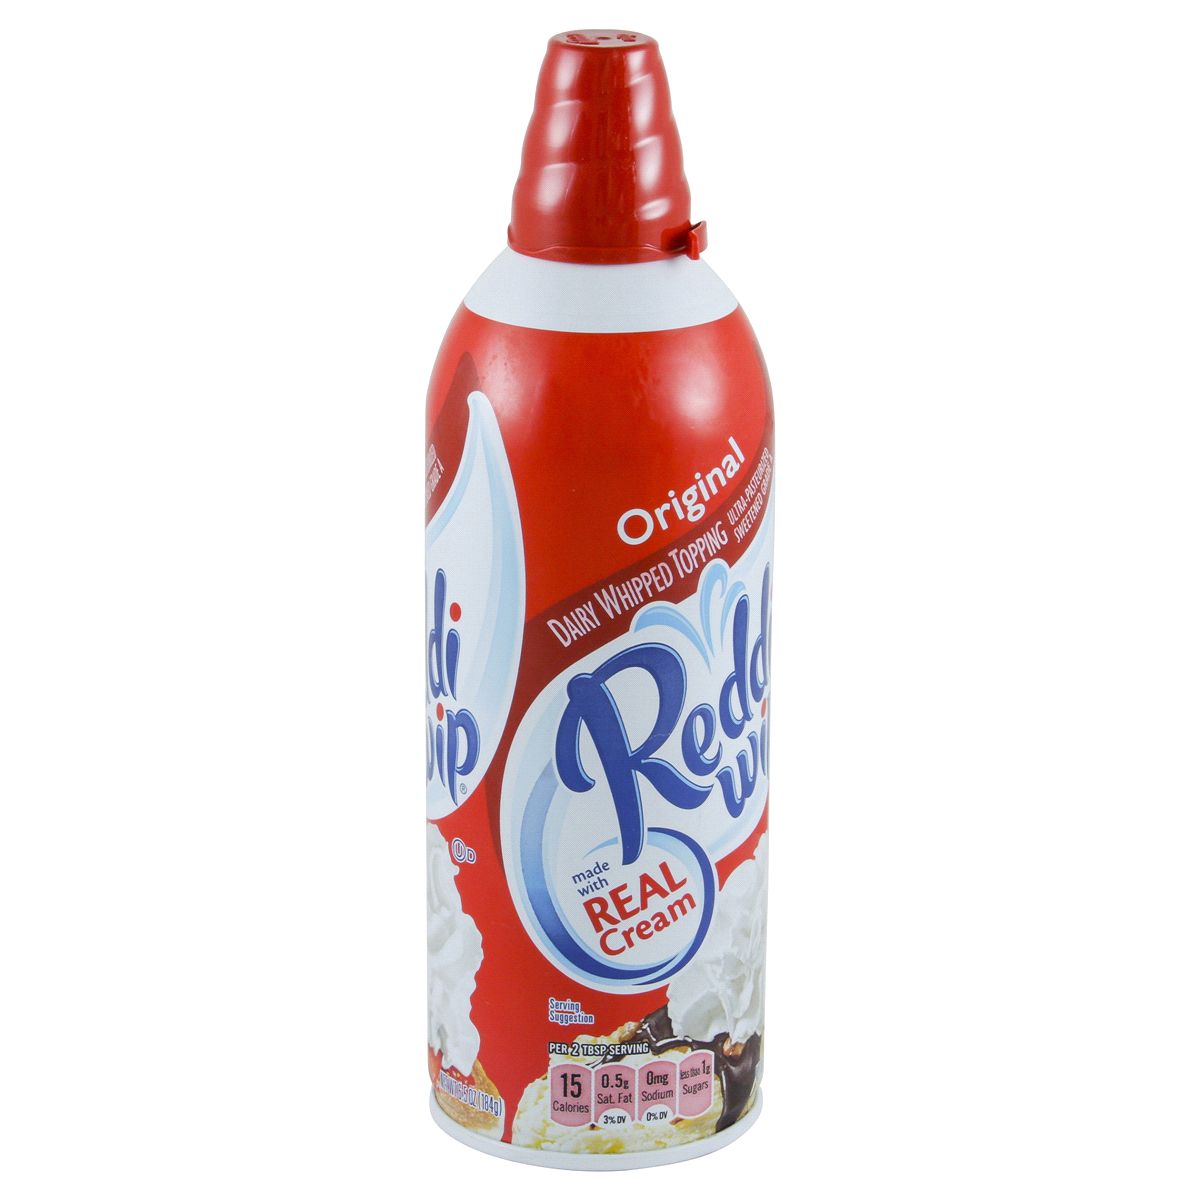 slide 21 of 32, Reddi-wip Original Whipped Topping Made with Real Cream, 6.5 oz. Spray Can, 6.5 oz